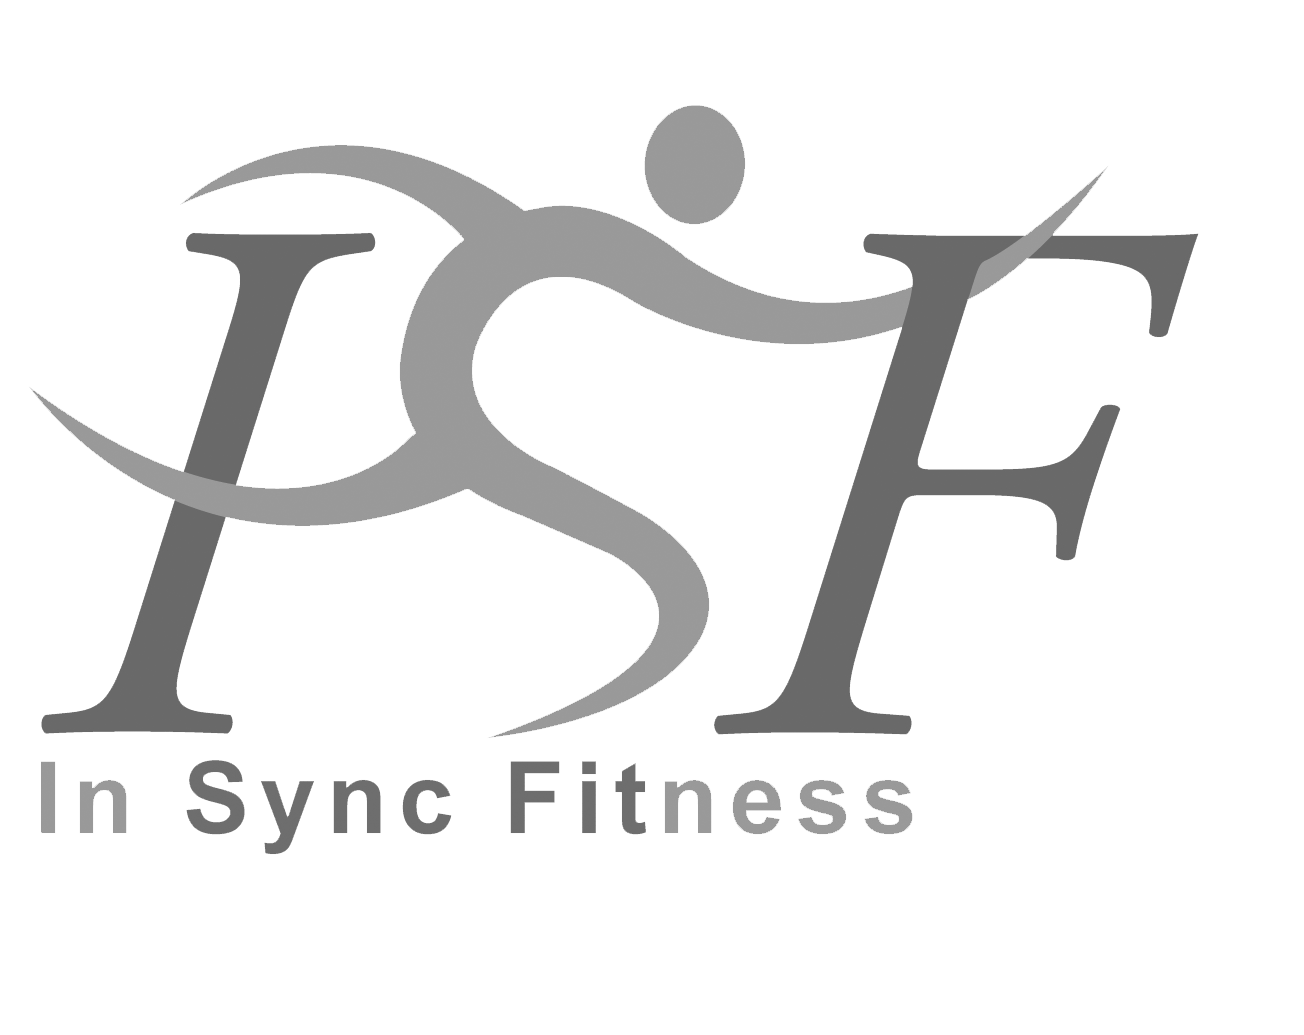 In Sync fitness